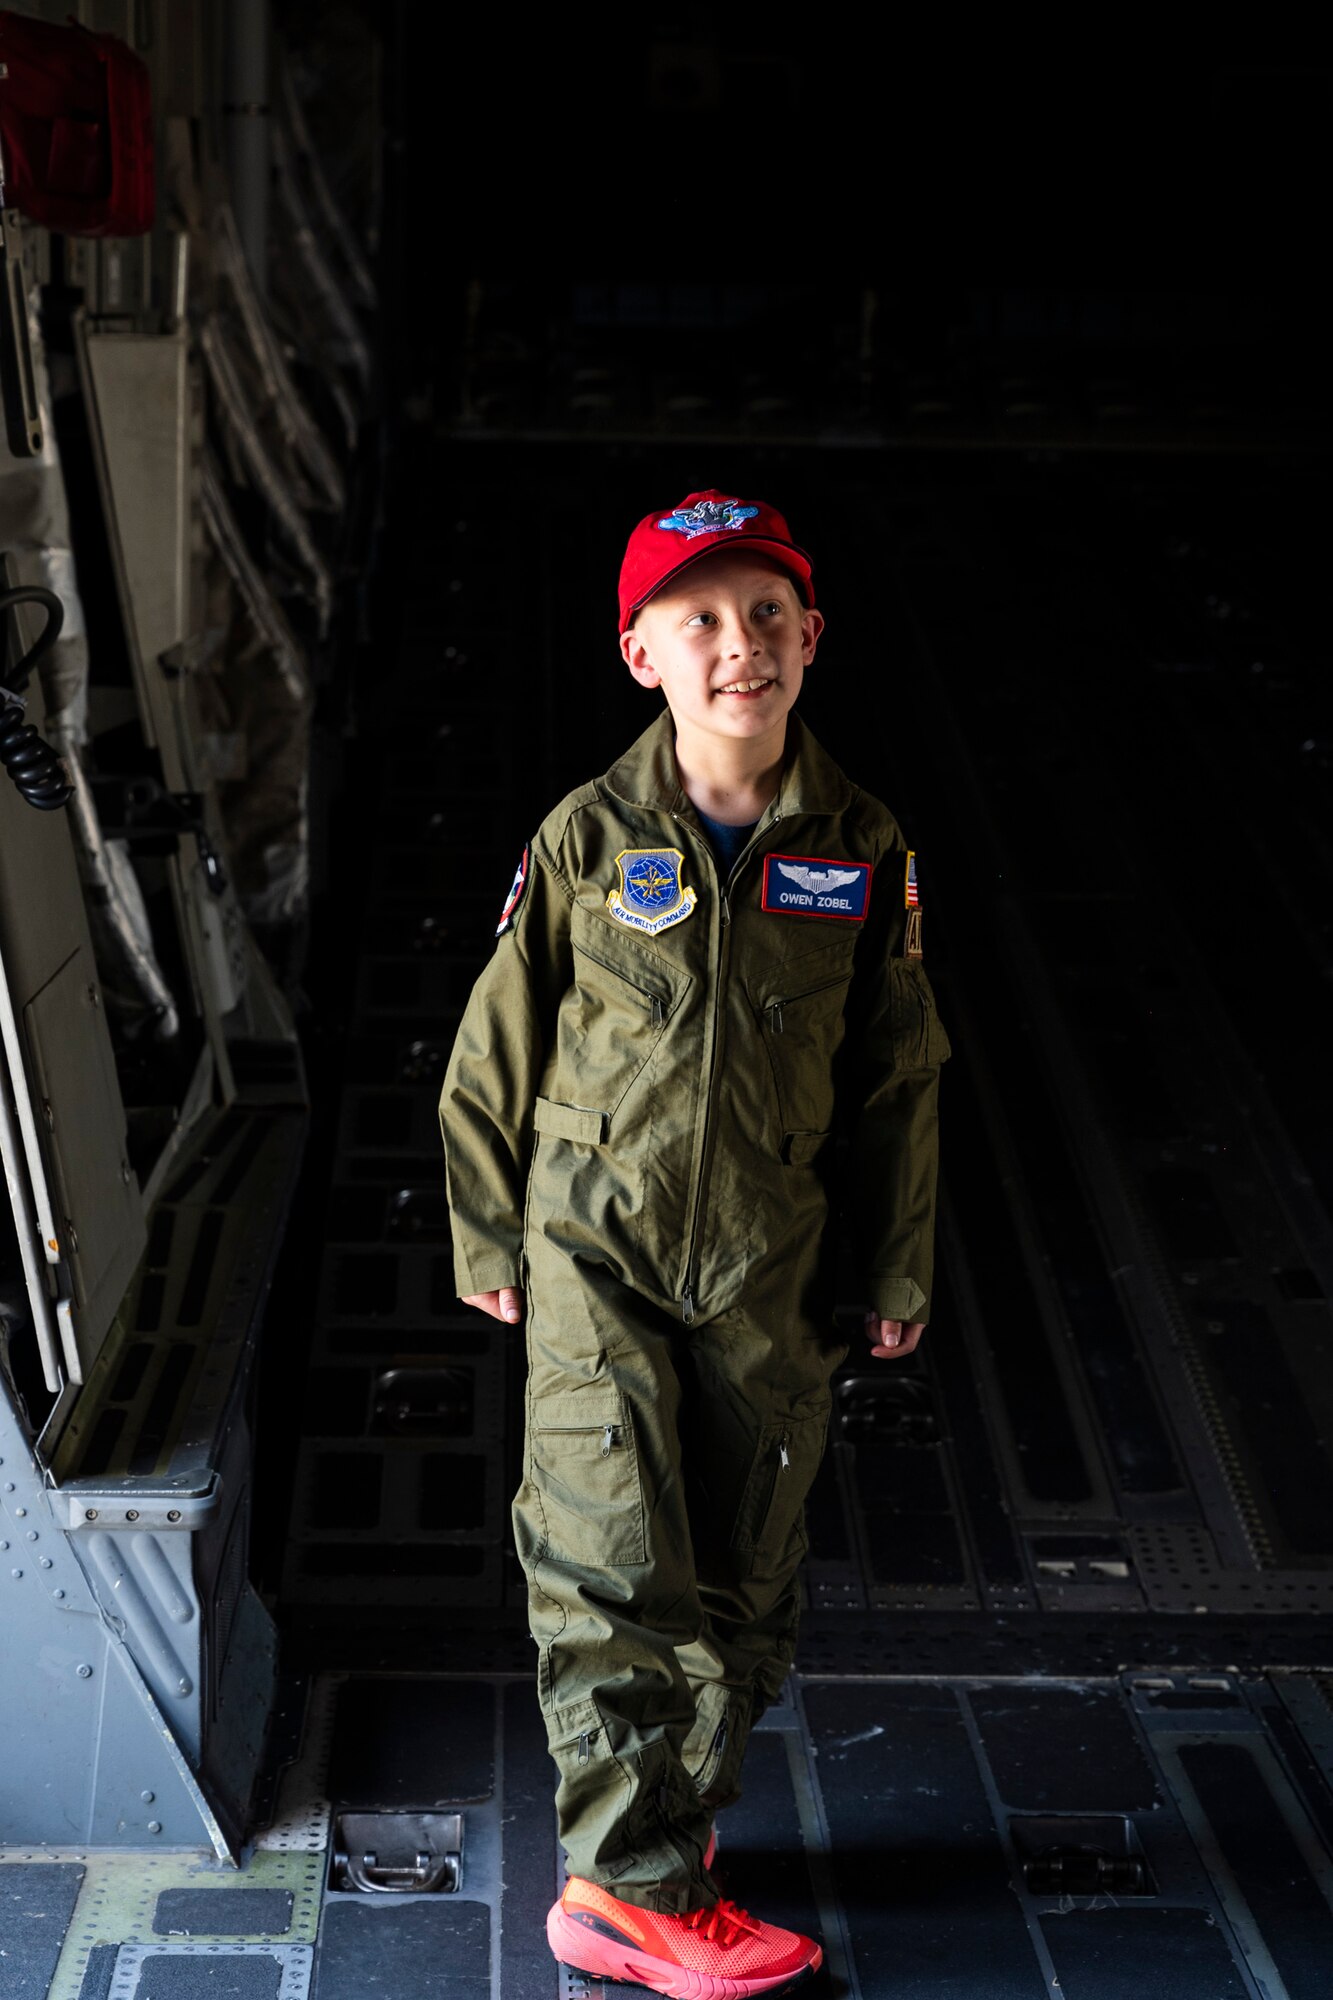 Owen Zobel, Team McChord’s newest pilot, tours a C-17 Globemaster III while taking part in the 4th Airlift Squadron’s Pilot for a Day program at Joint Base Lewis-McChord, Washington, May 11, 2023. The goal of the Pilot for a Day program is to provide children and their families in the local community who have catastrophic illnesses a once in a lifetime opportunity; the child is issued a flight suit and visits different mission sets around base such as the Security Forces Squadron Working Dog compound, the Fire Department, and a tour of the Air Traffic Control Tower and a C-17 Globemaster III. (U.S. Air Force photo by Staff Sgt. Rachel Williams)